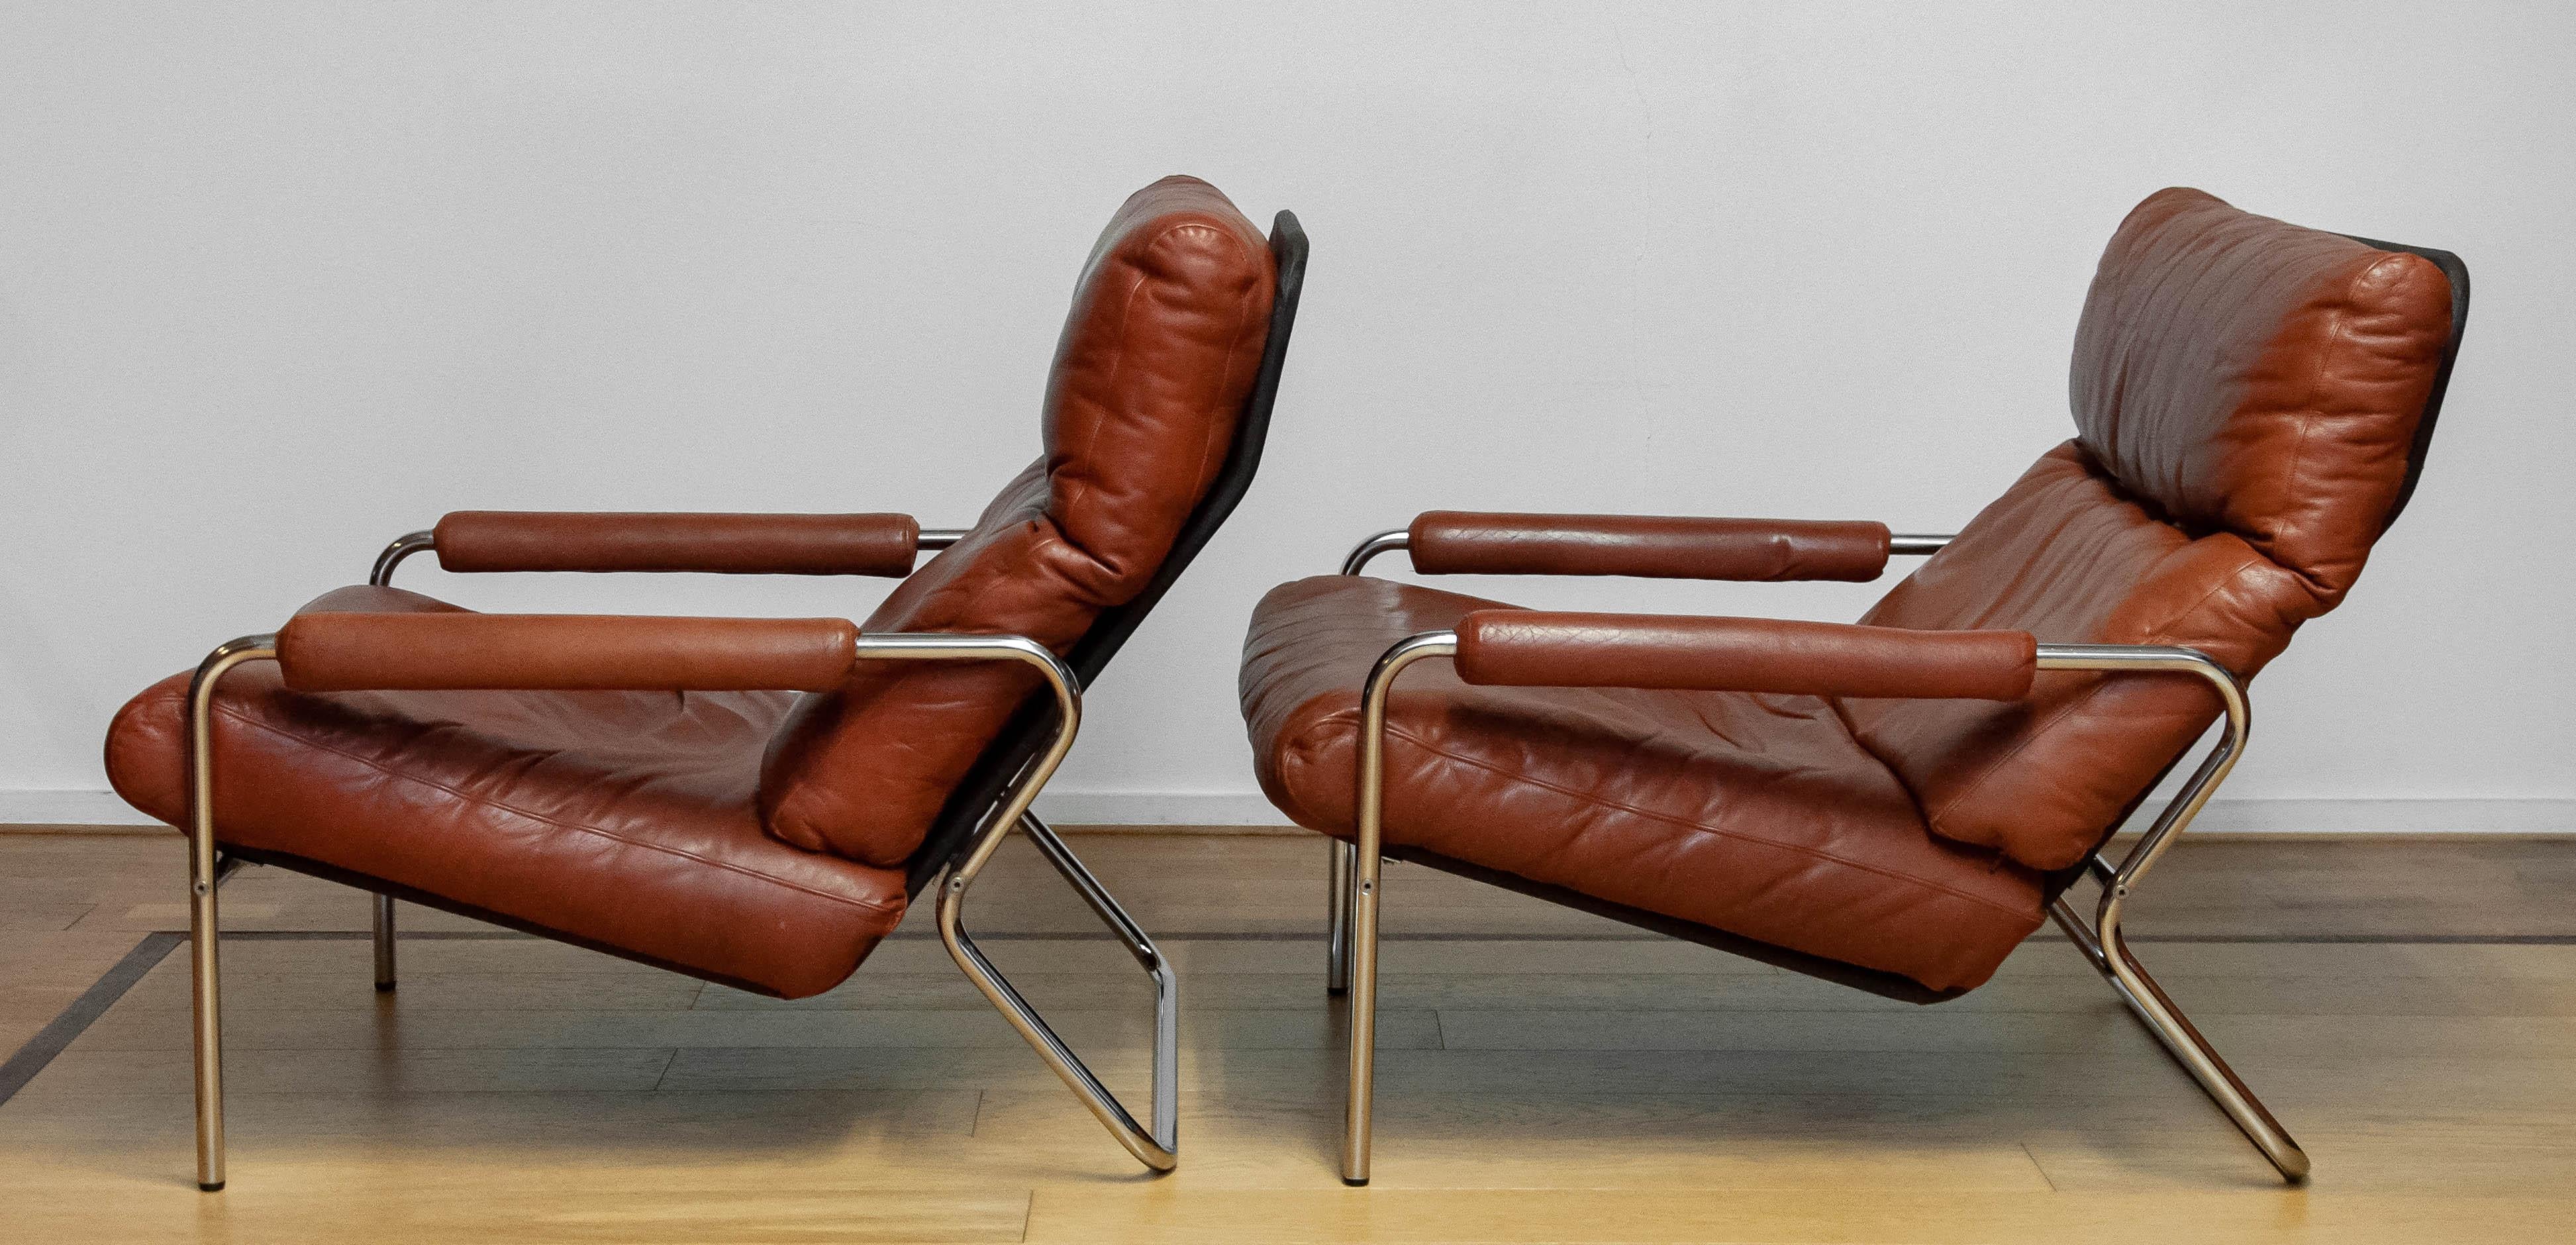 1960s Pair Scandinavian Modern Tubular Chrome And Brown Leather Lounge Chairs In Good Condition In Silvolde, Gelderland